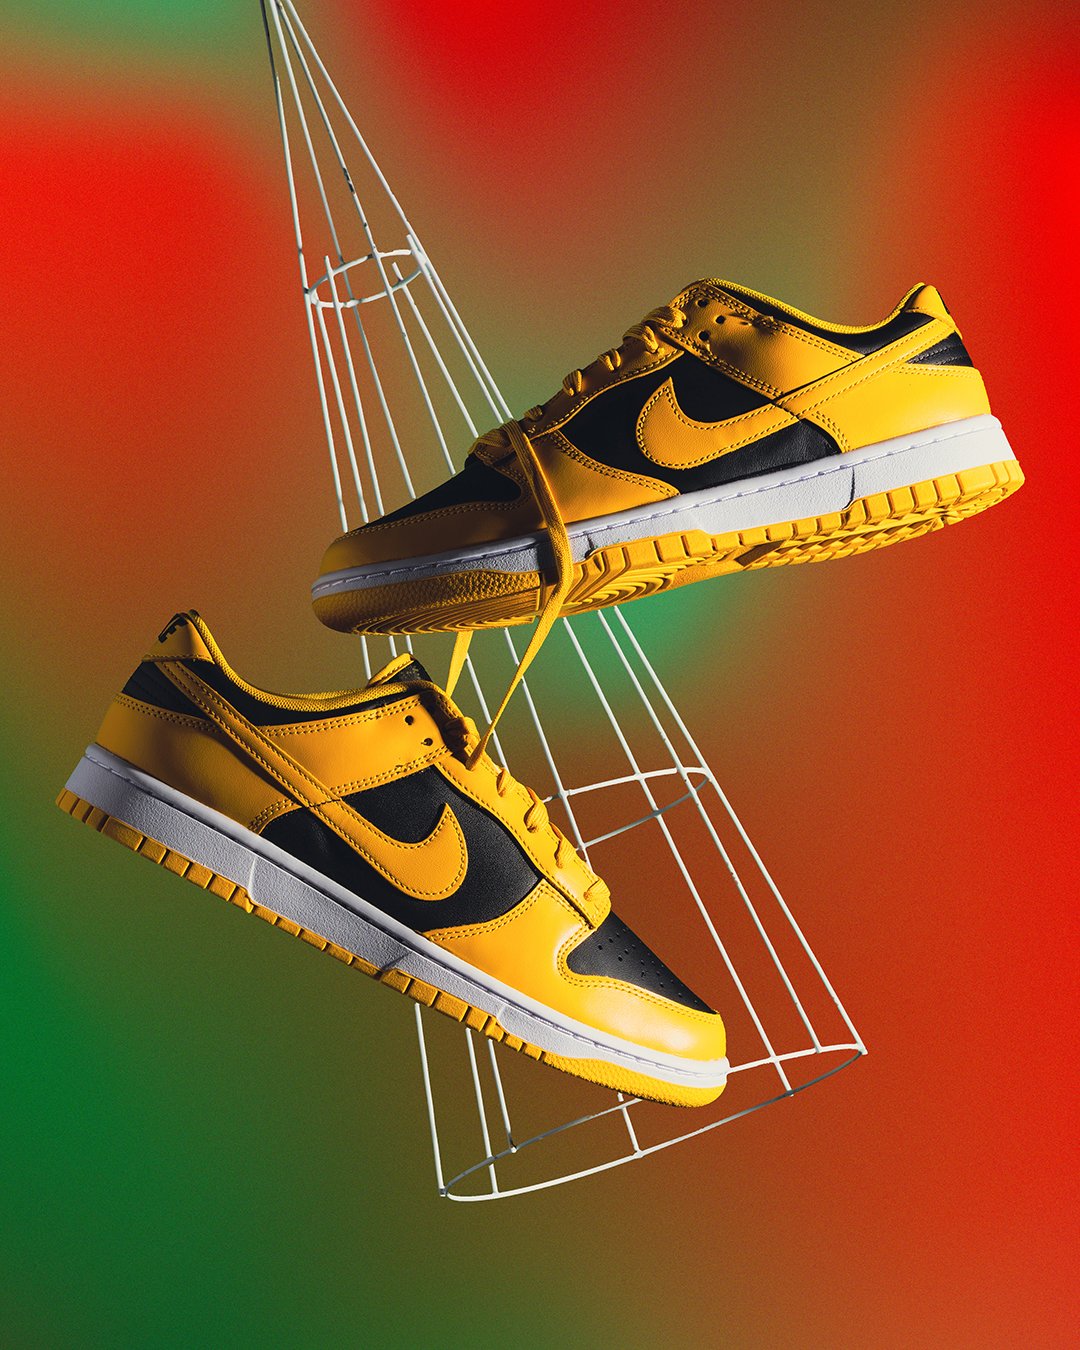 Discriminación Por ahí carpeta Foot Locker on Twitter: "Heritage color blocking for a classic feel. #Nike  Dunk Low 'Goldenrod' launches 12.16 Reservations are open for Ship to Me  and Store Pickup through the Foot Locker App. #